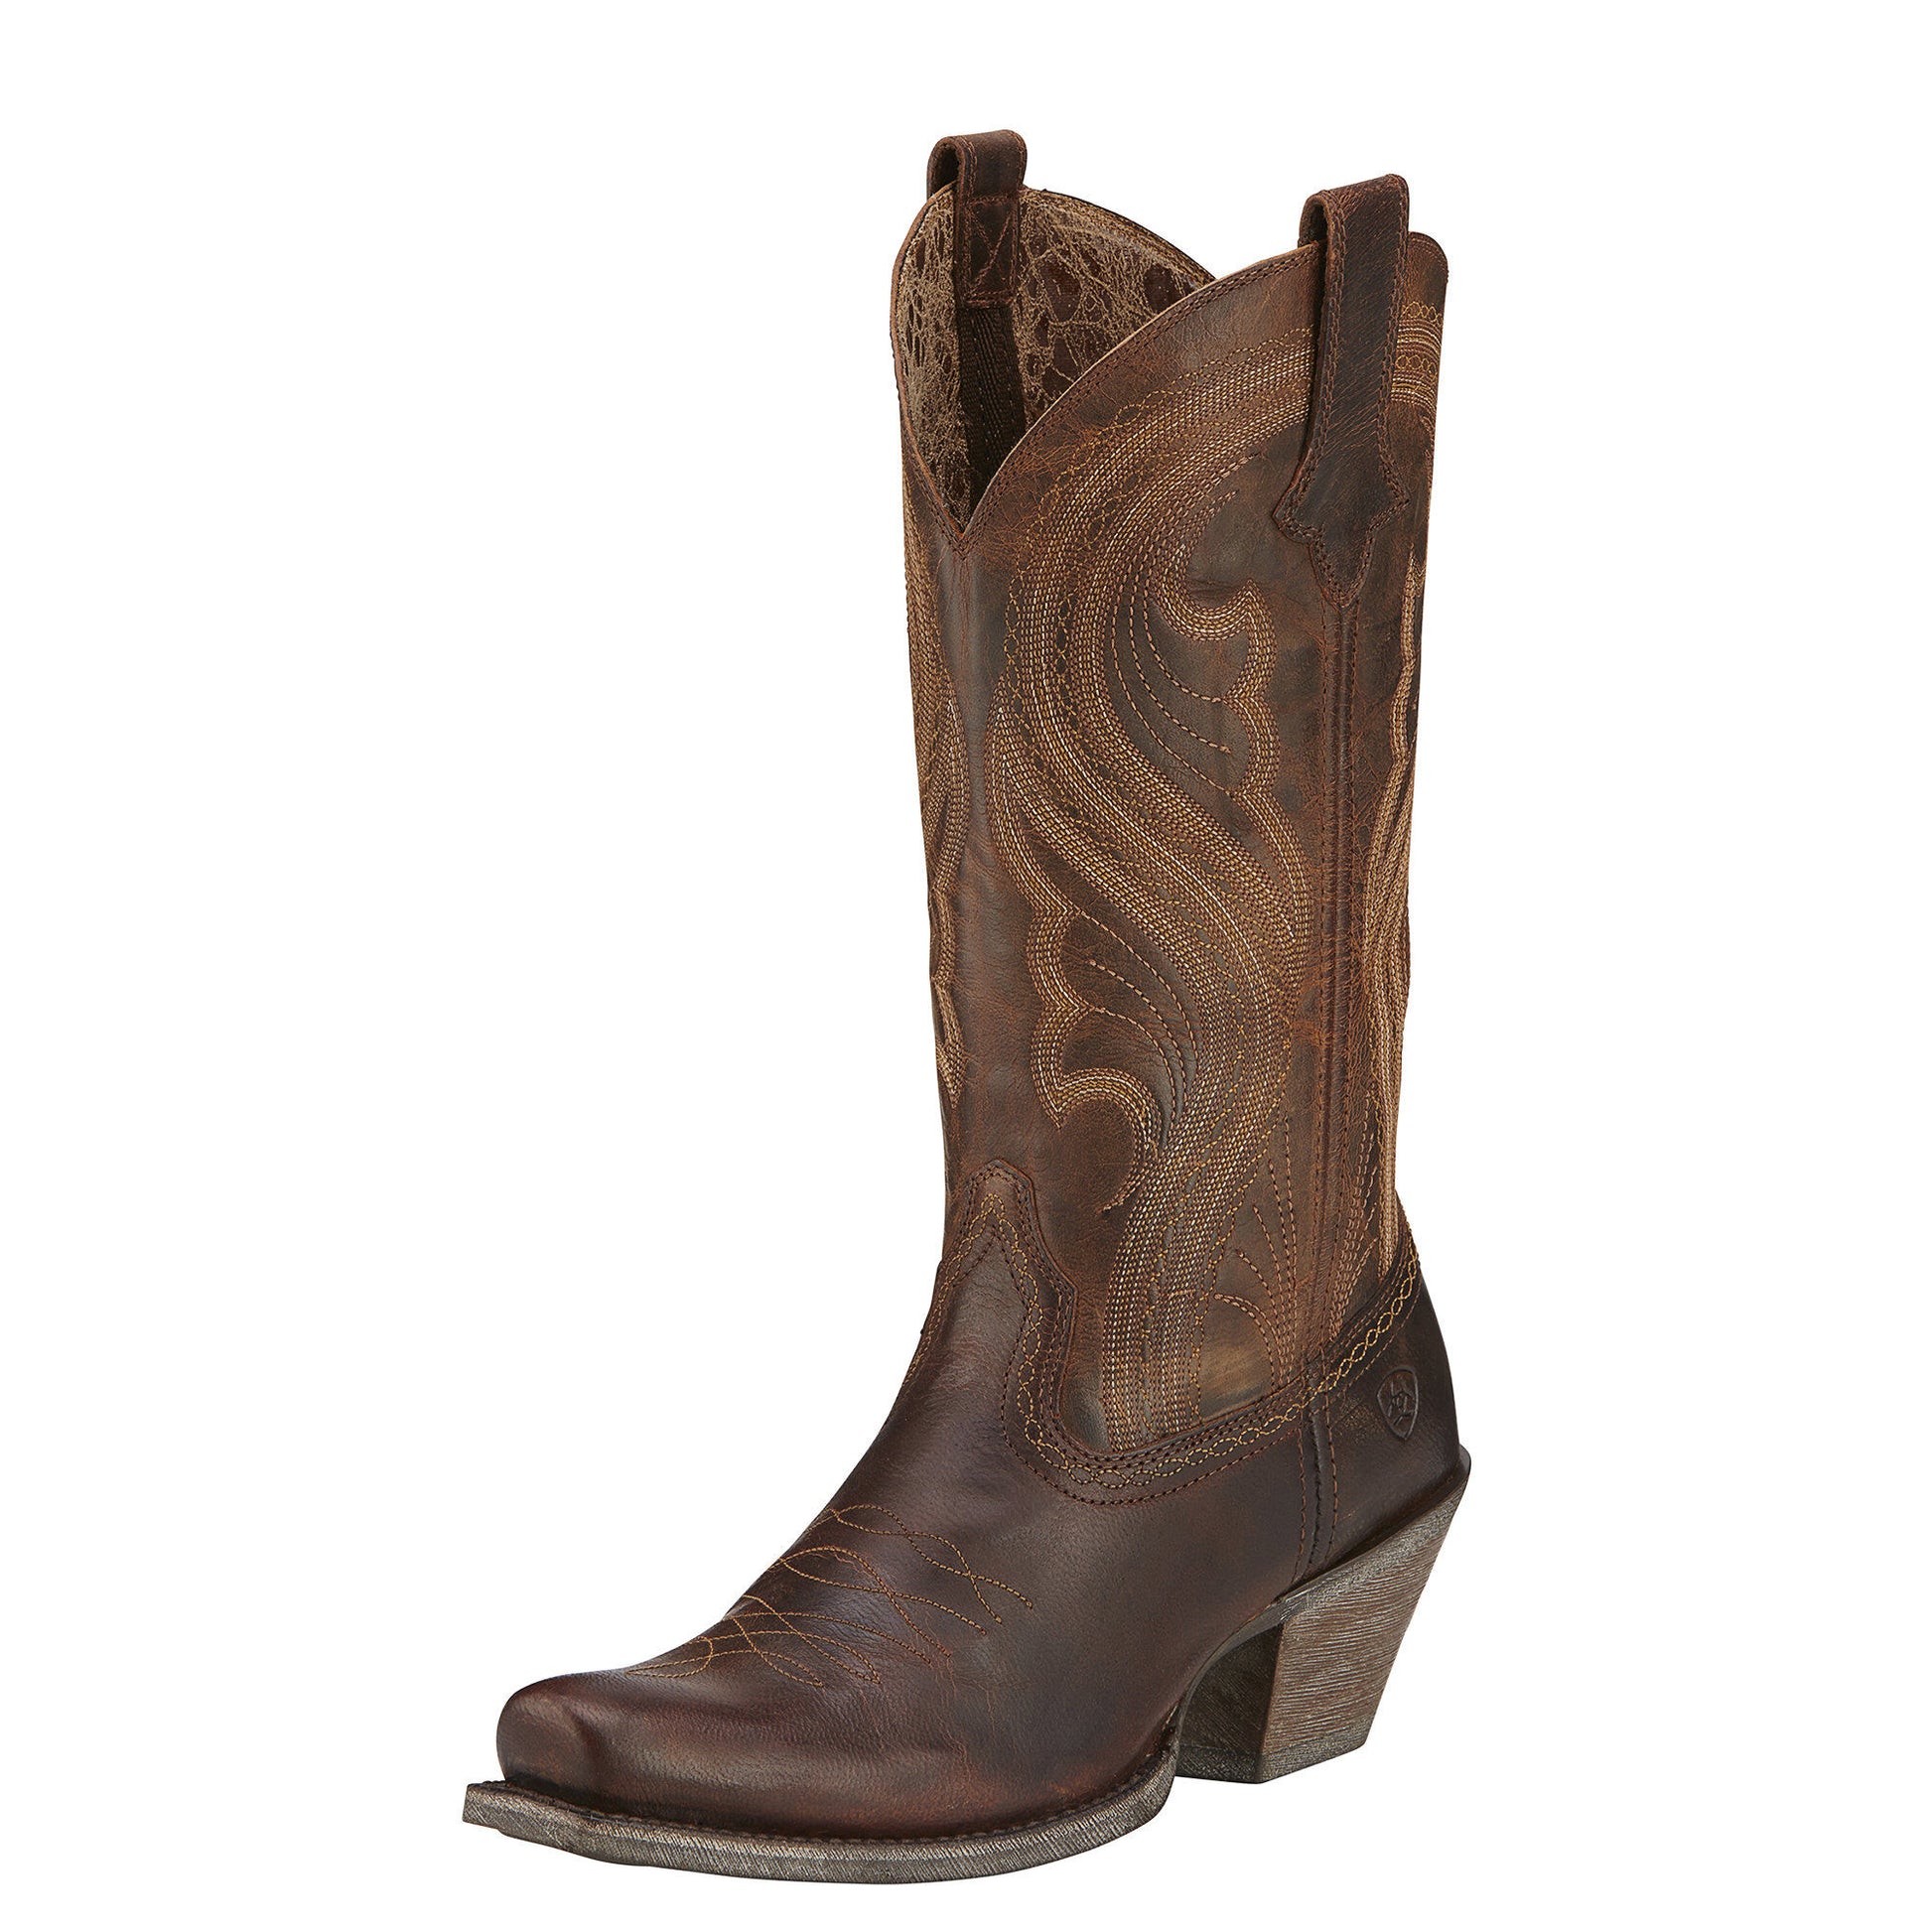 Ariat Women's Lively Boot - Sassy Brown - French's Boots